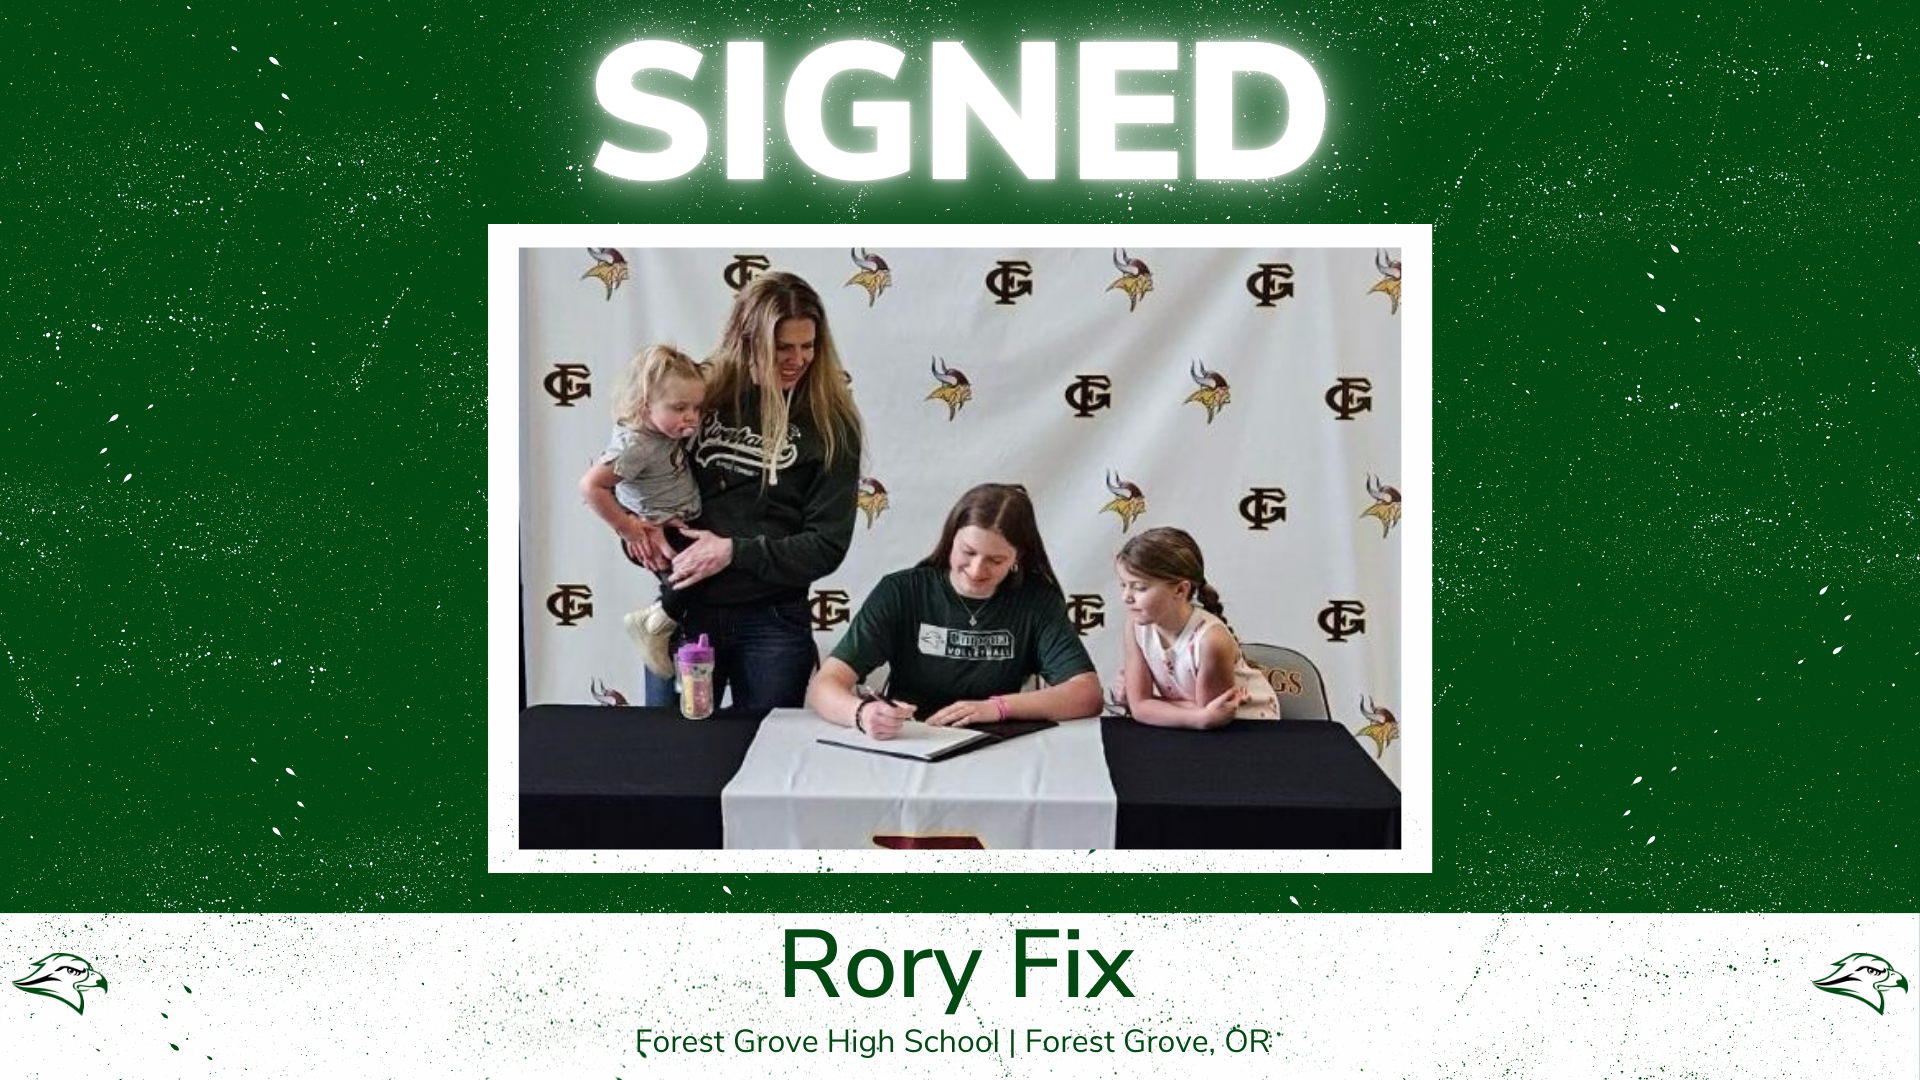 RiverHawks Sign Forest Grove Star, Rory Fix